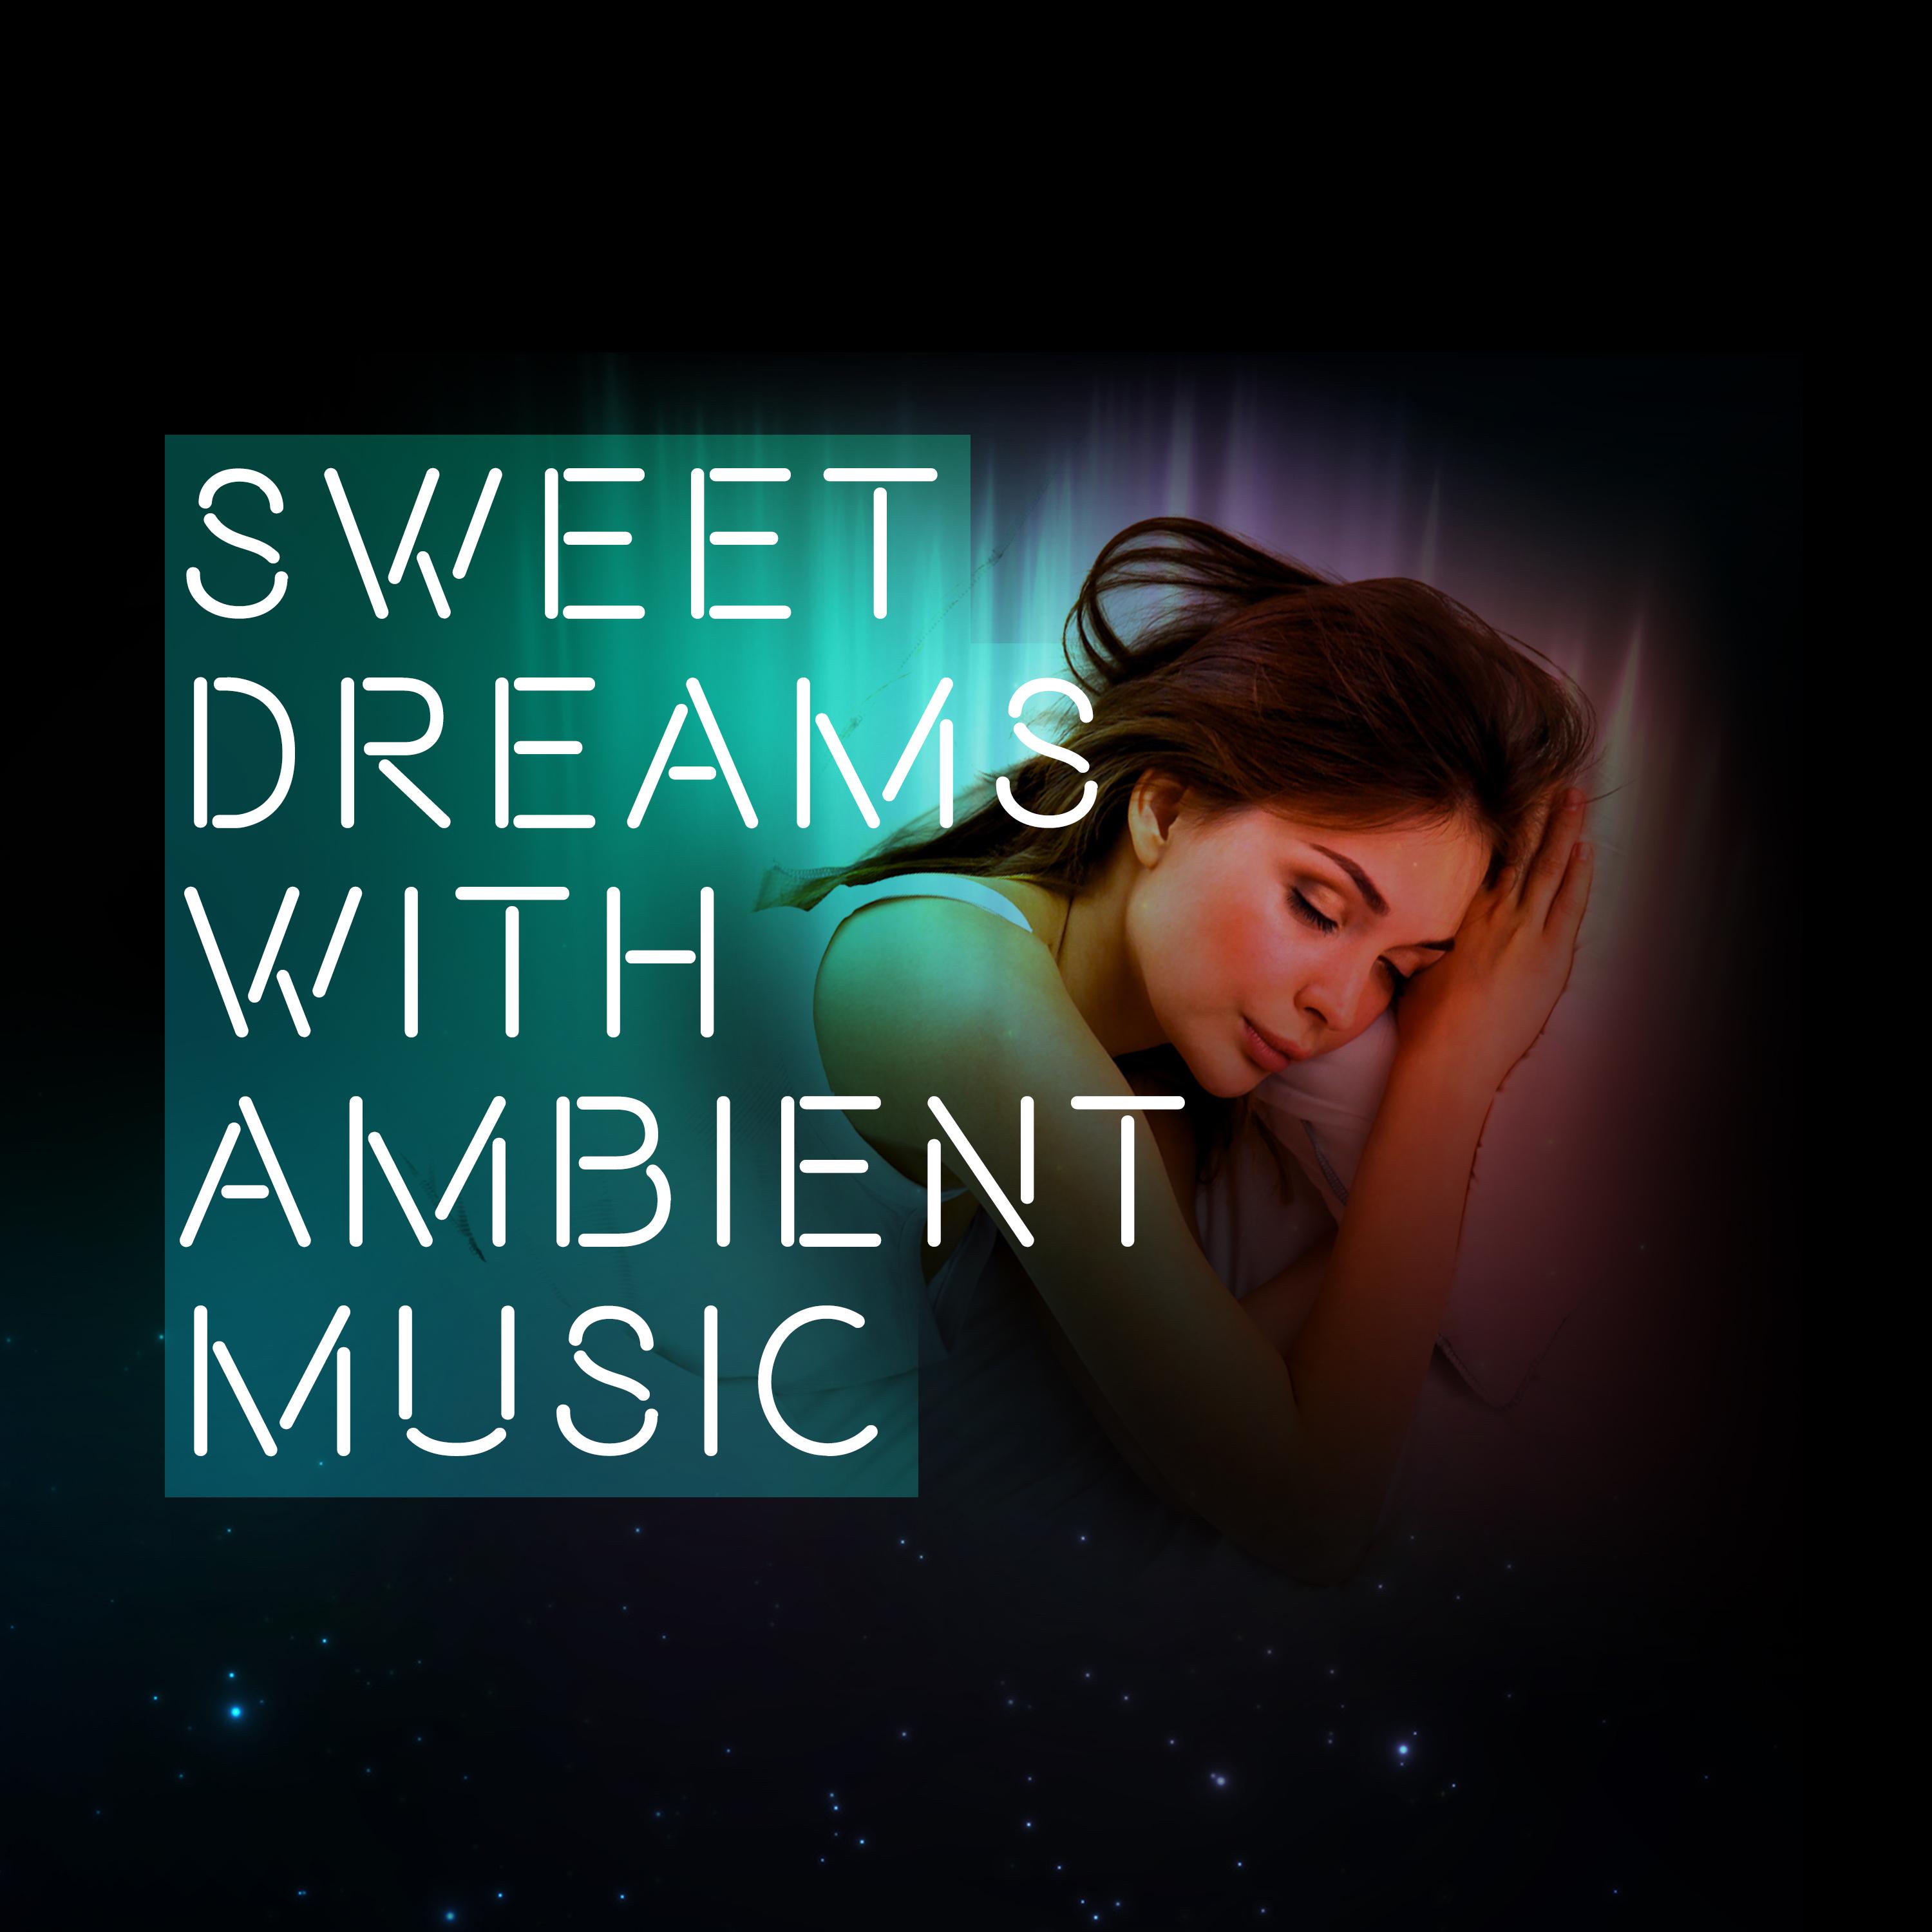 Sweet Dreams with Ambient Music